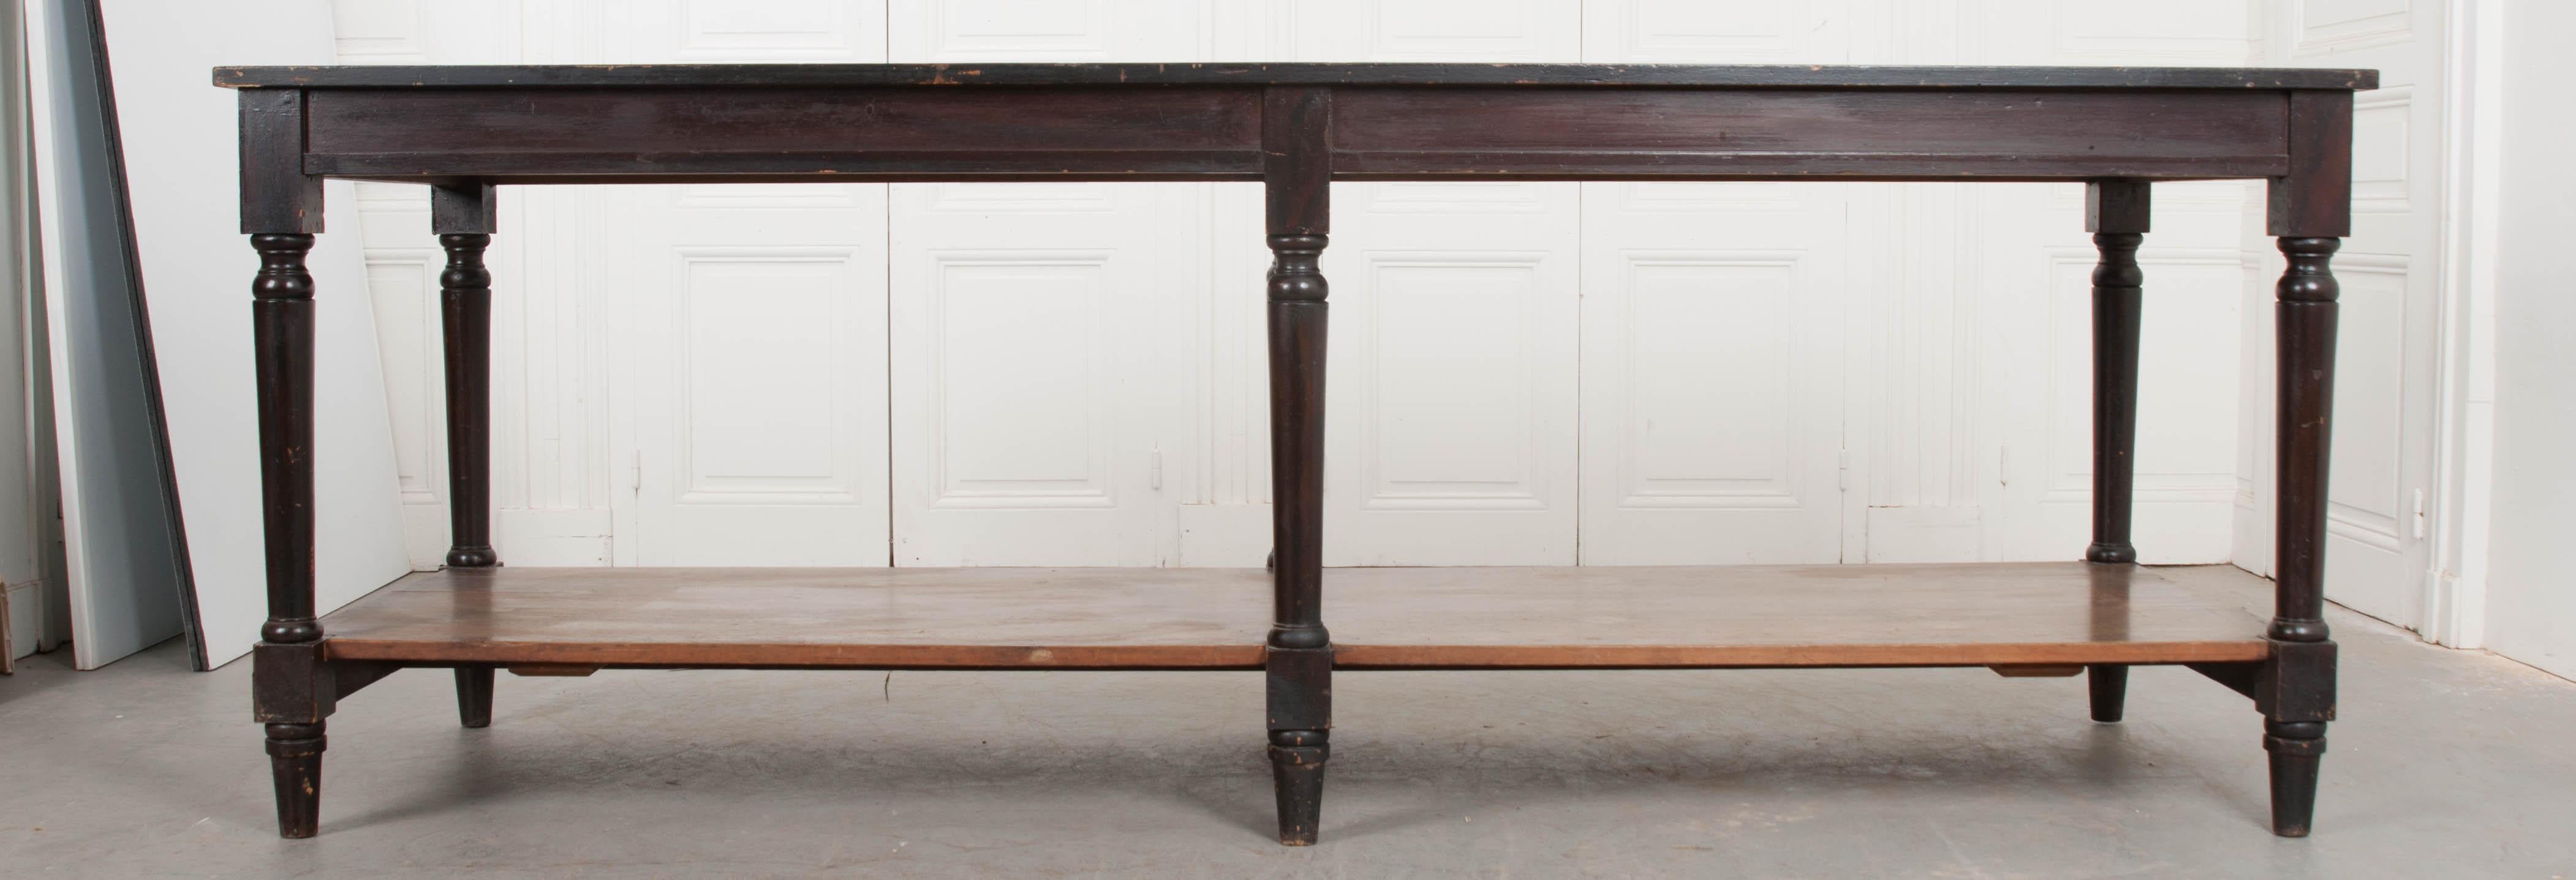 A gripping pair of dark drapery tables from 1900s France. The long tables both have tops that are painted black, slightly darker than the dark brown stain used to color the apron and legs. There is an undertier shelf that runs the length of each